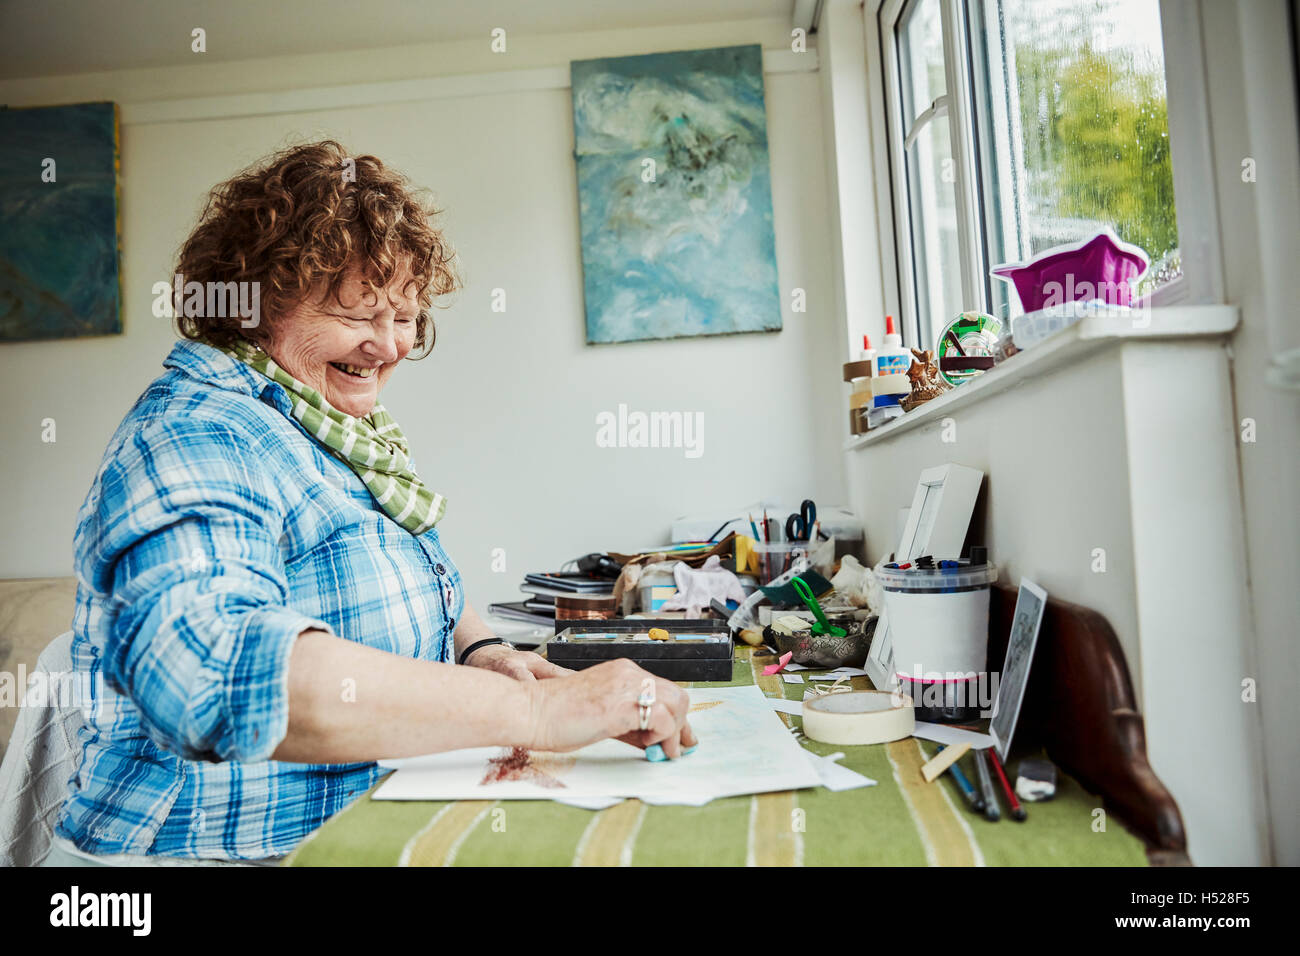 A woman artist working at a table, using a large blue pastel crayon and drawing on paper. Stock Photo